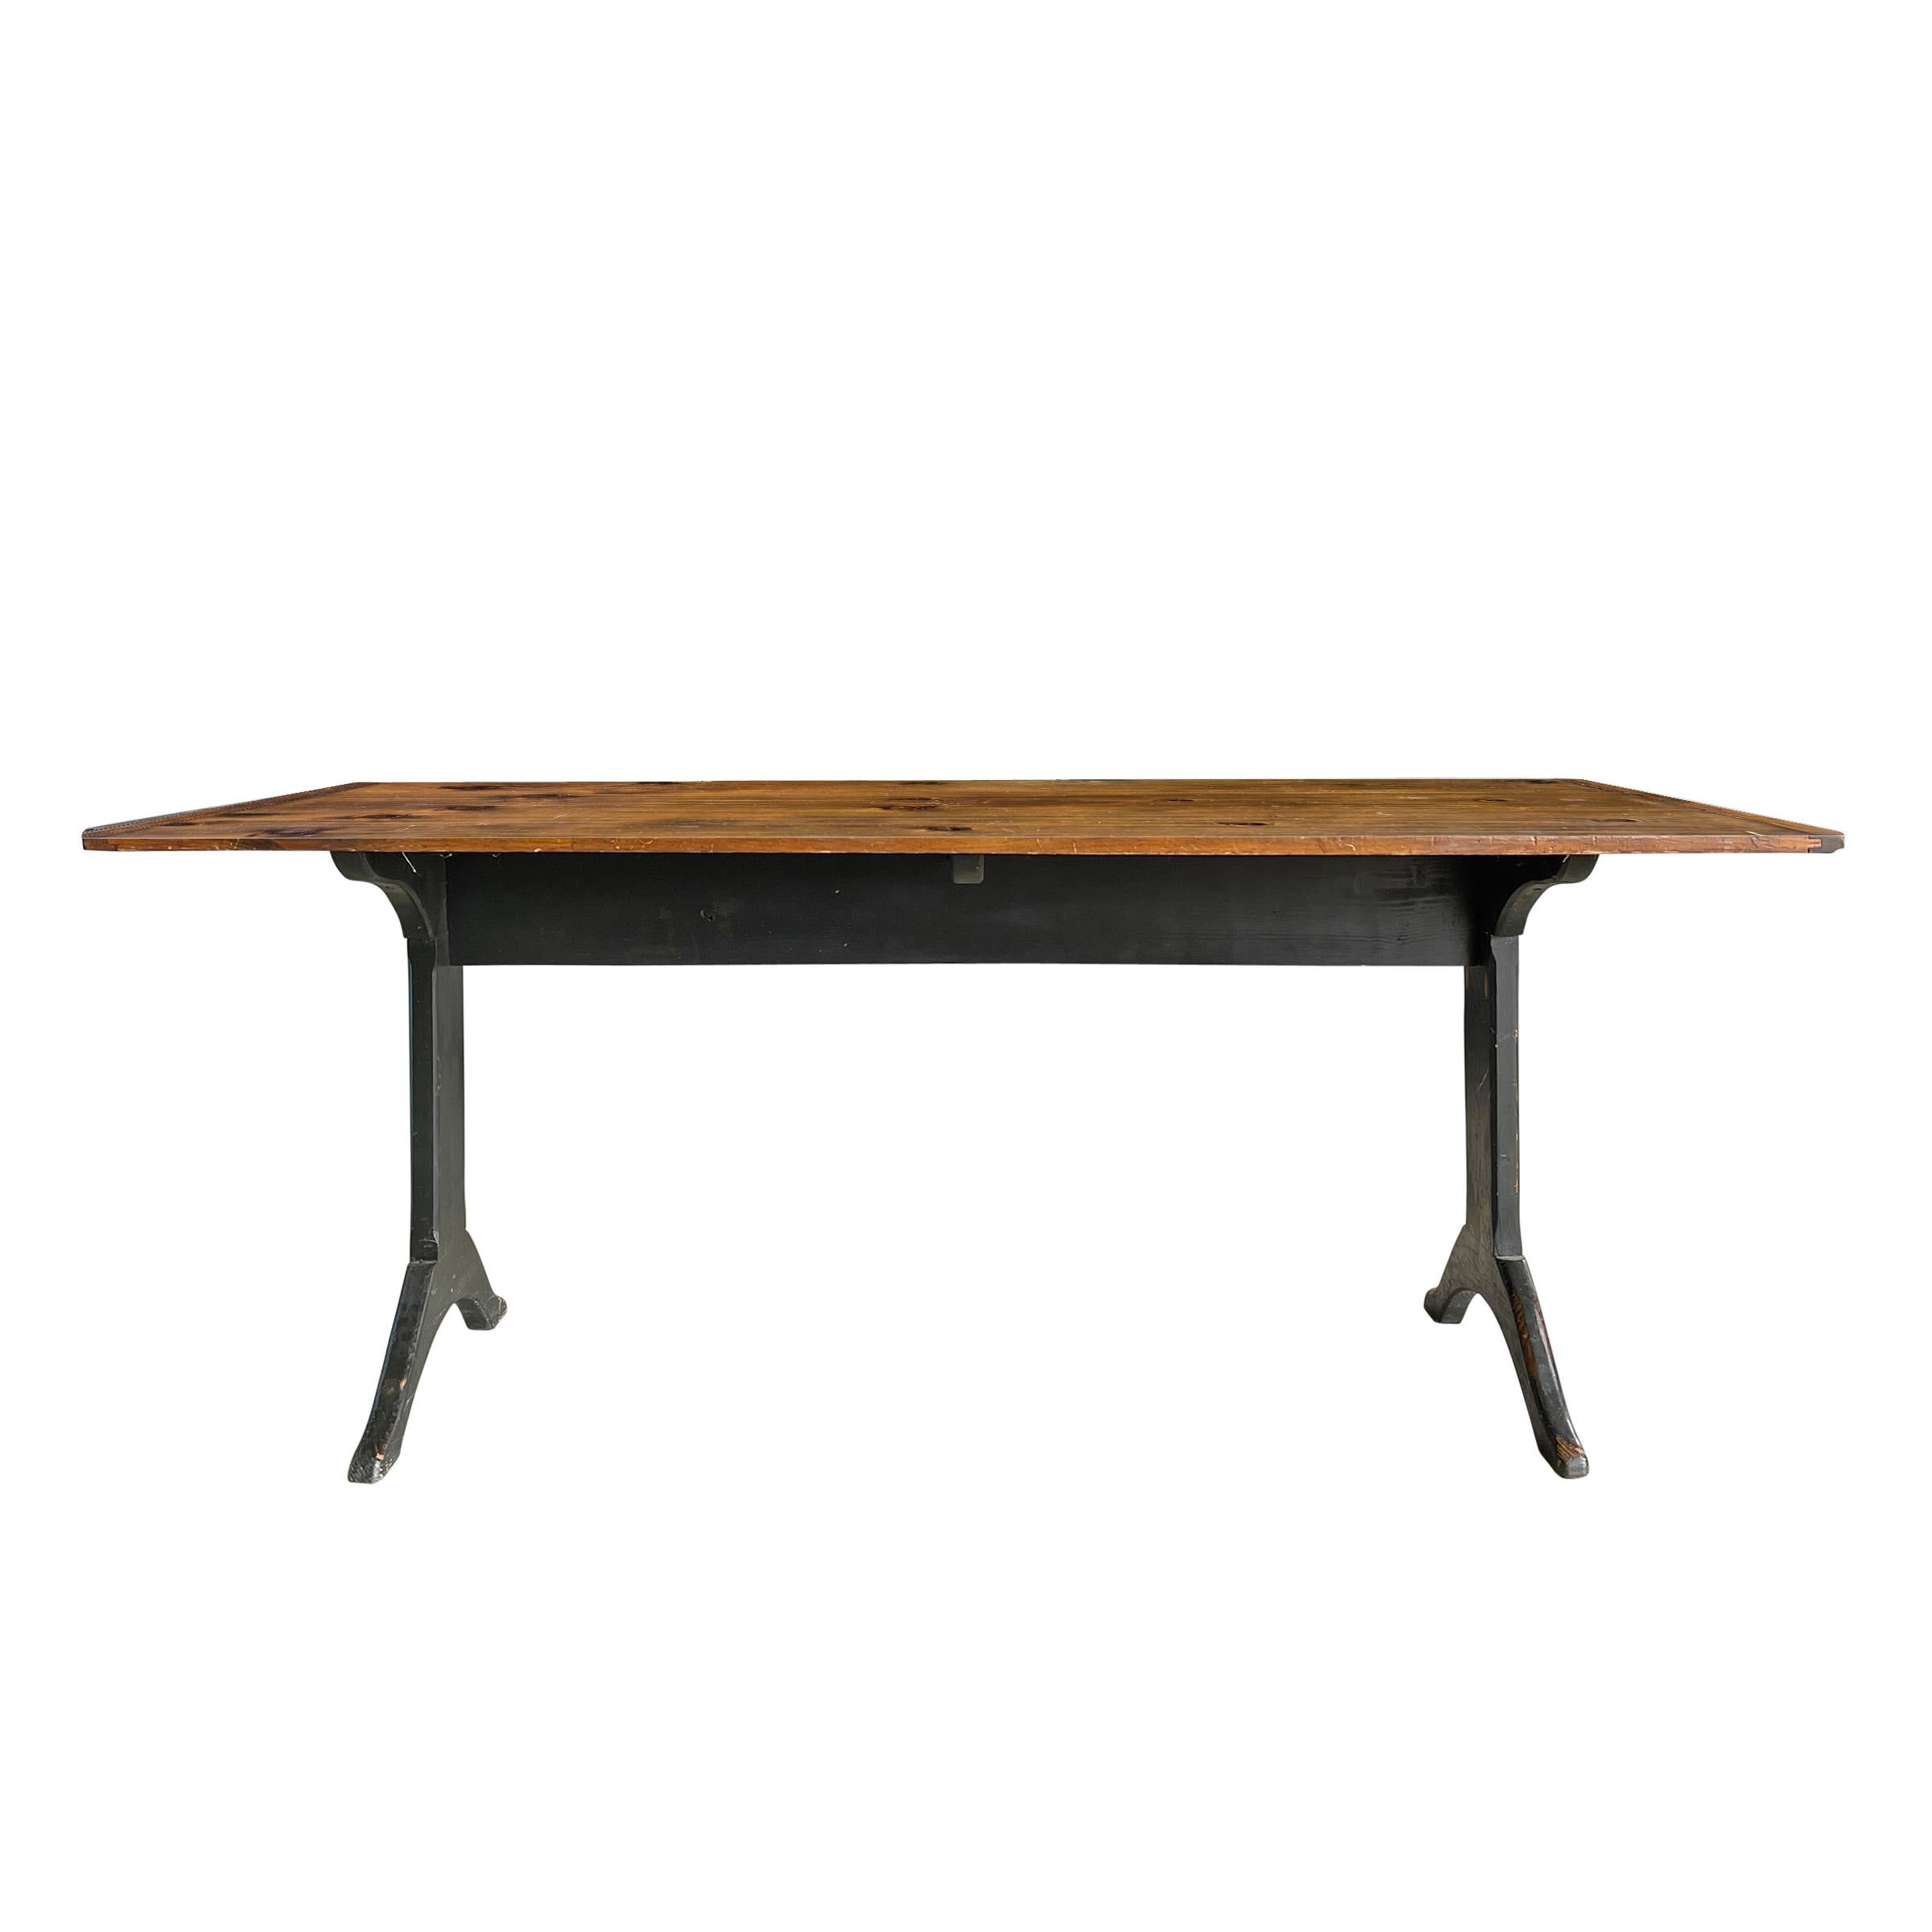 20th Century American Pine Farm Table In Good Condition For Sale In Chicago, IL